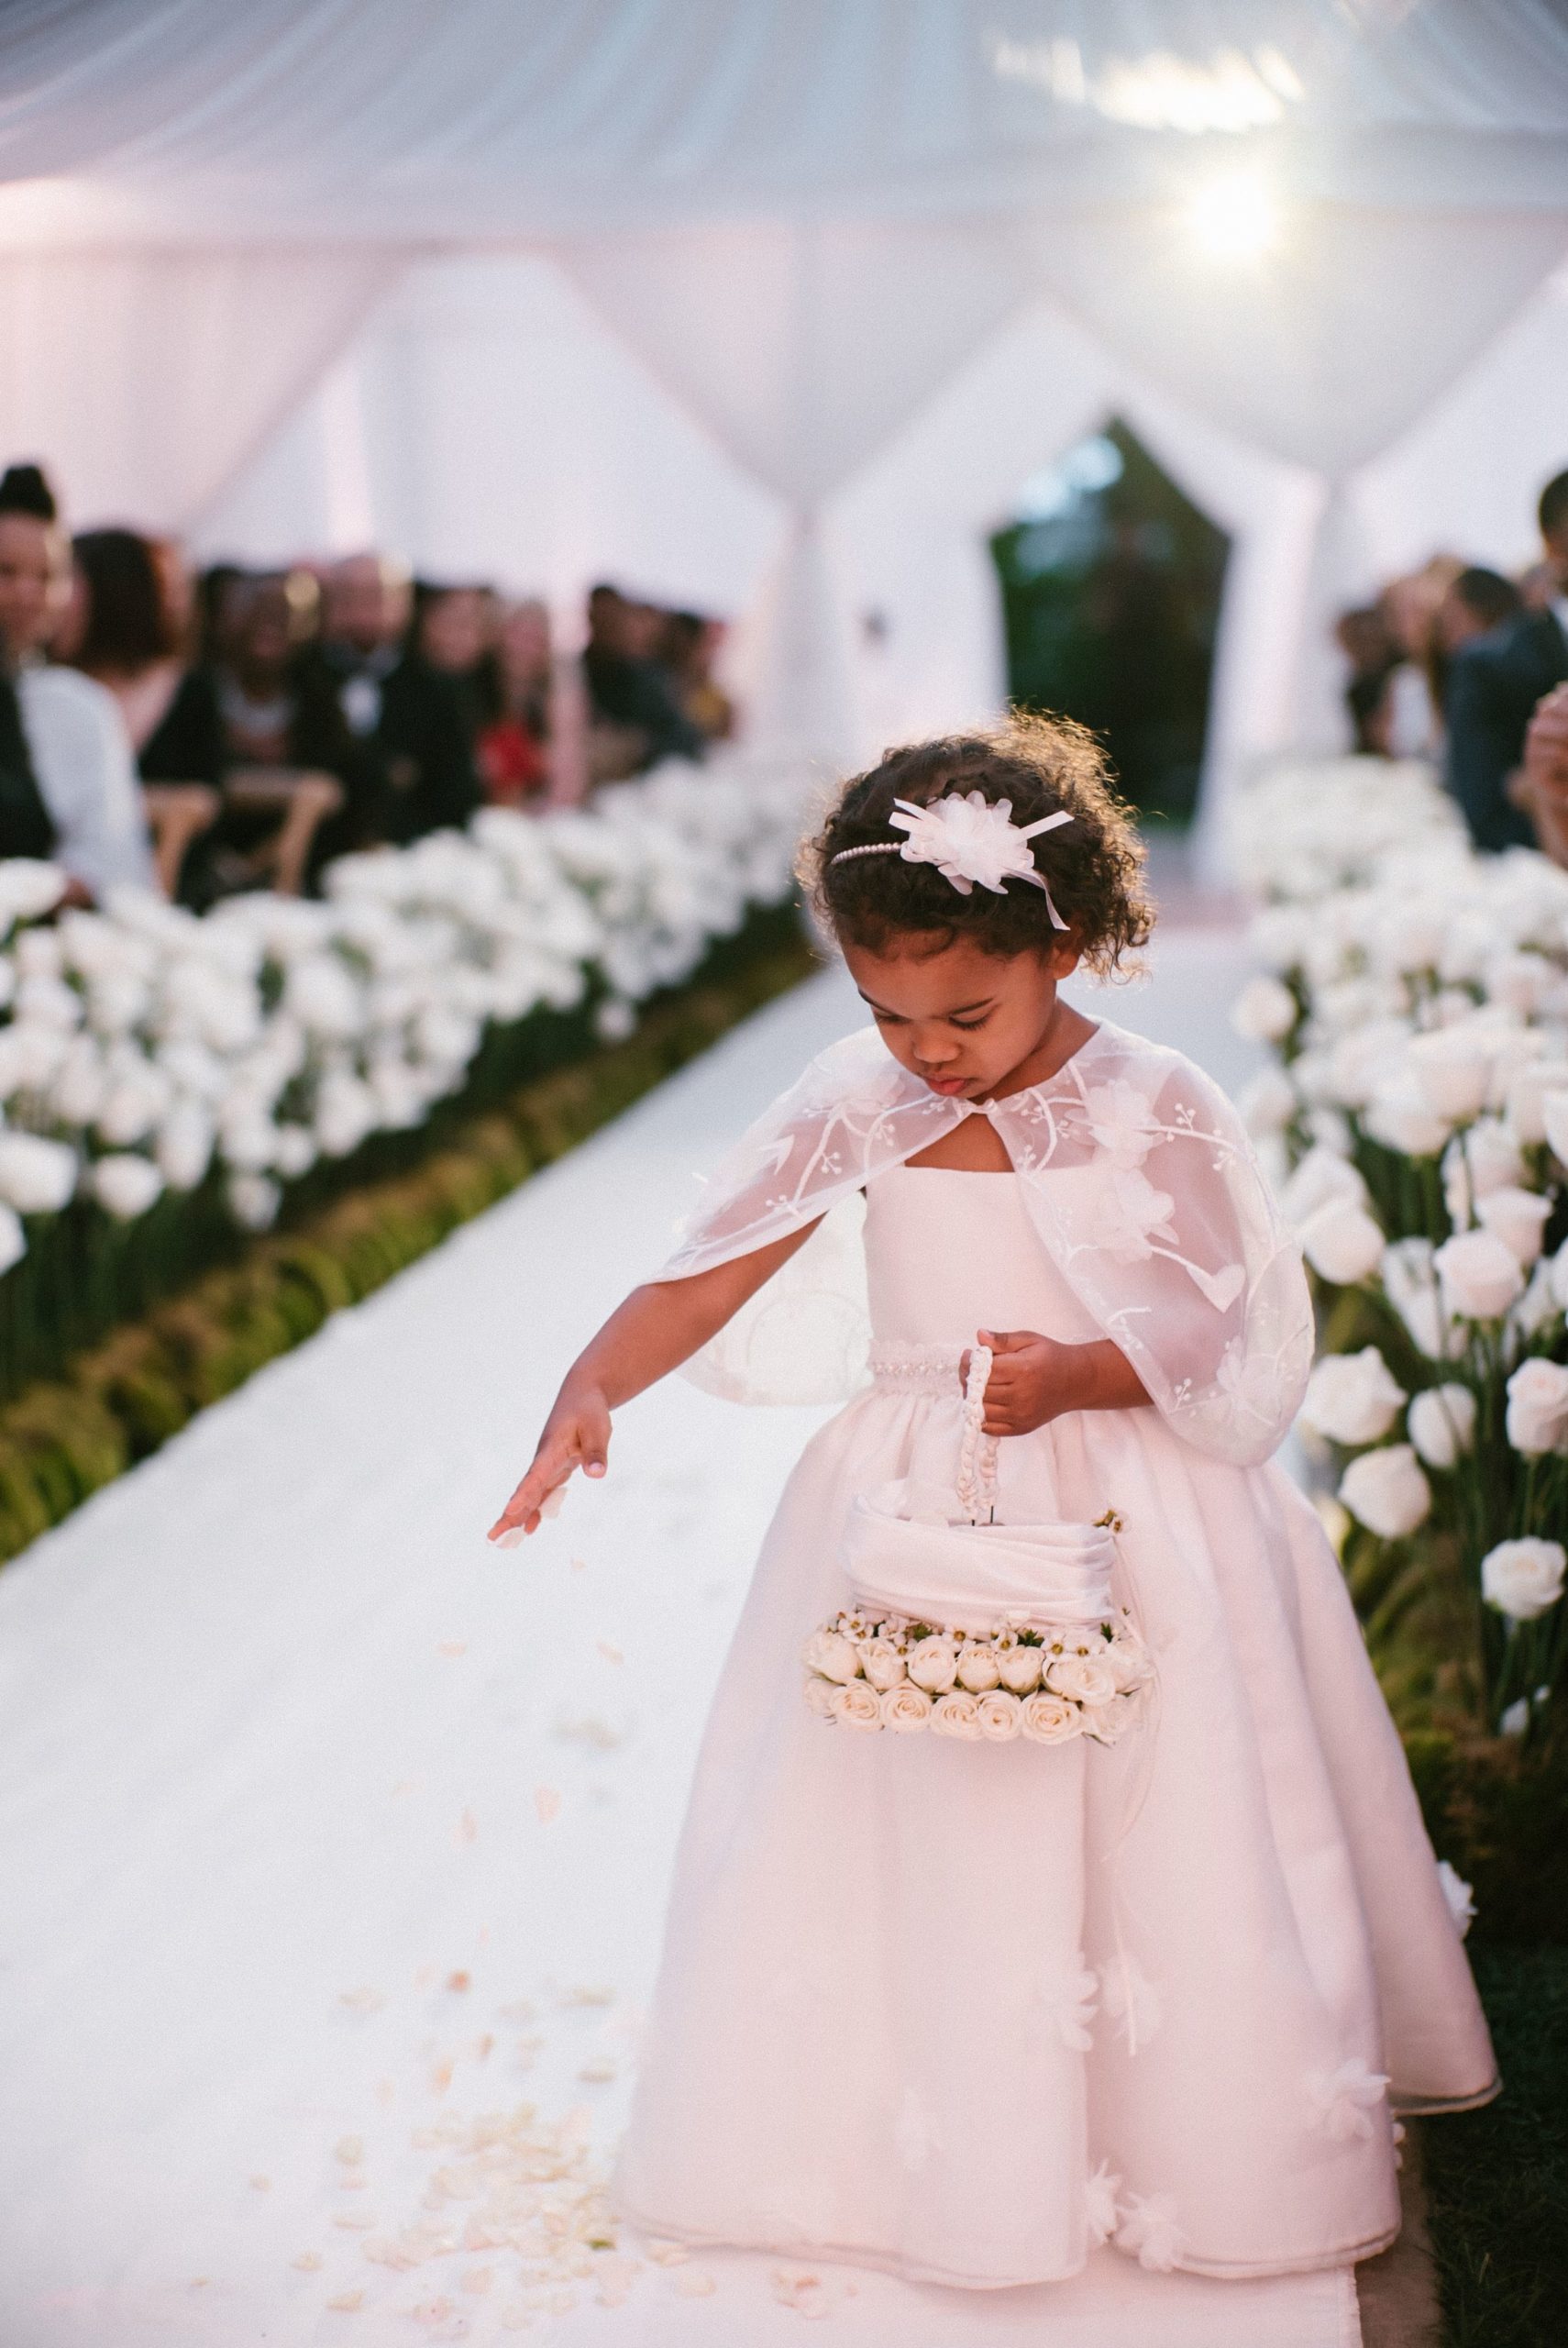 10 Really Cool Flower Ideas for Ring Bearers